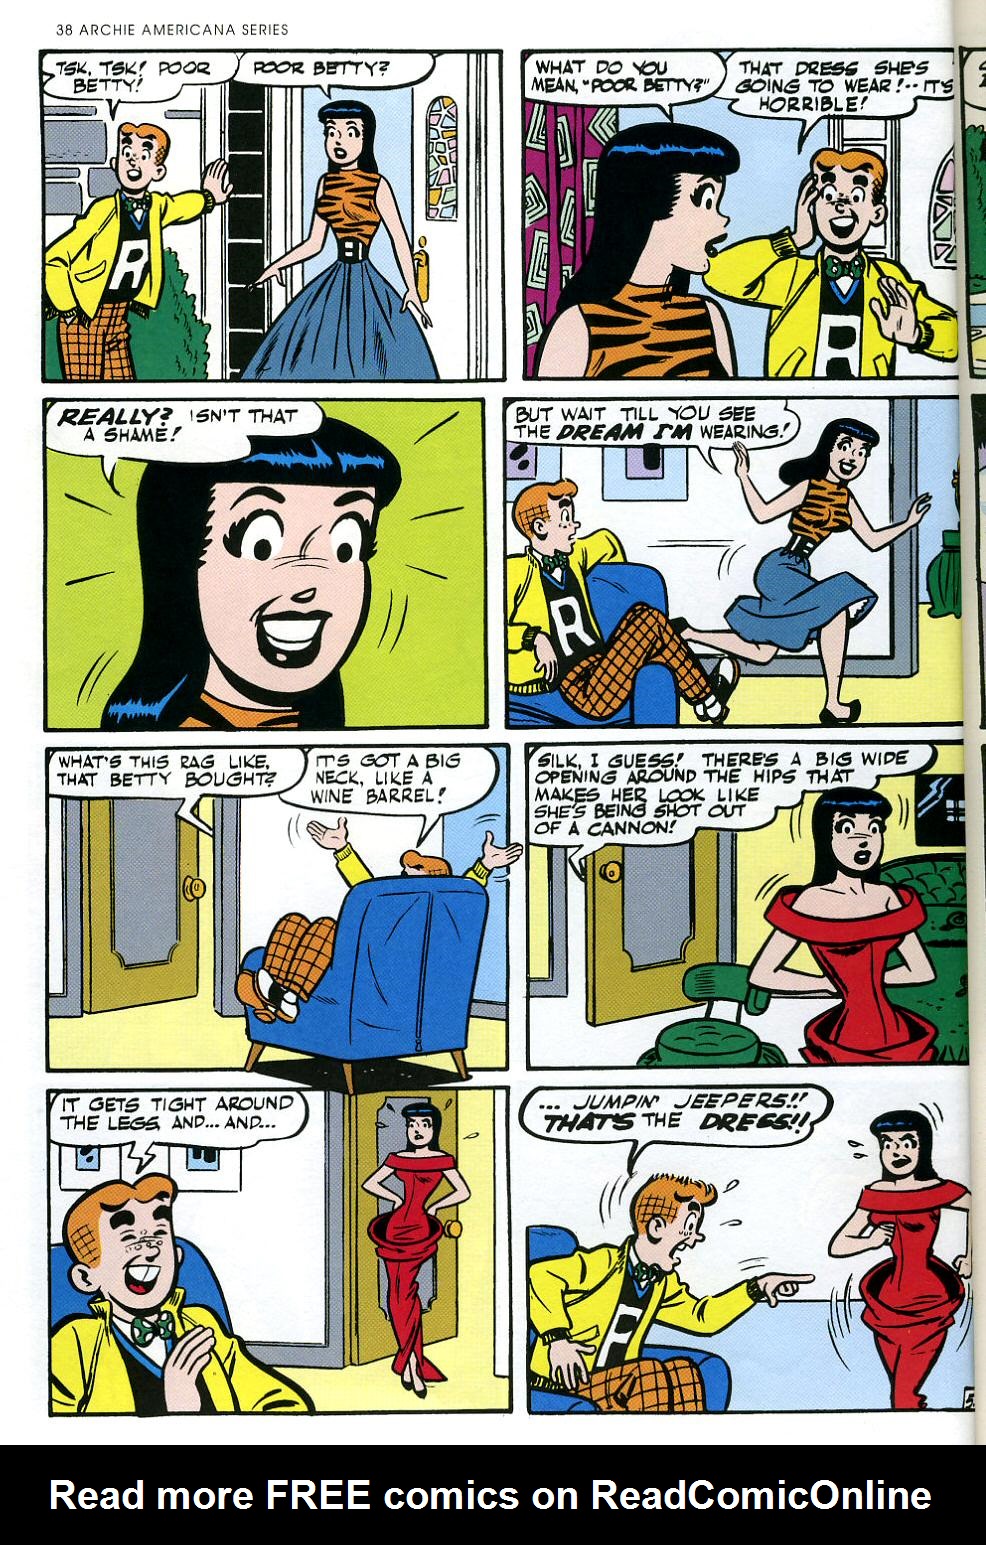 Read online Archie Americana Series comic -  Issue # TPB 2 - 40